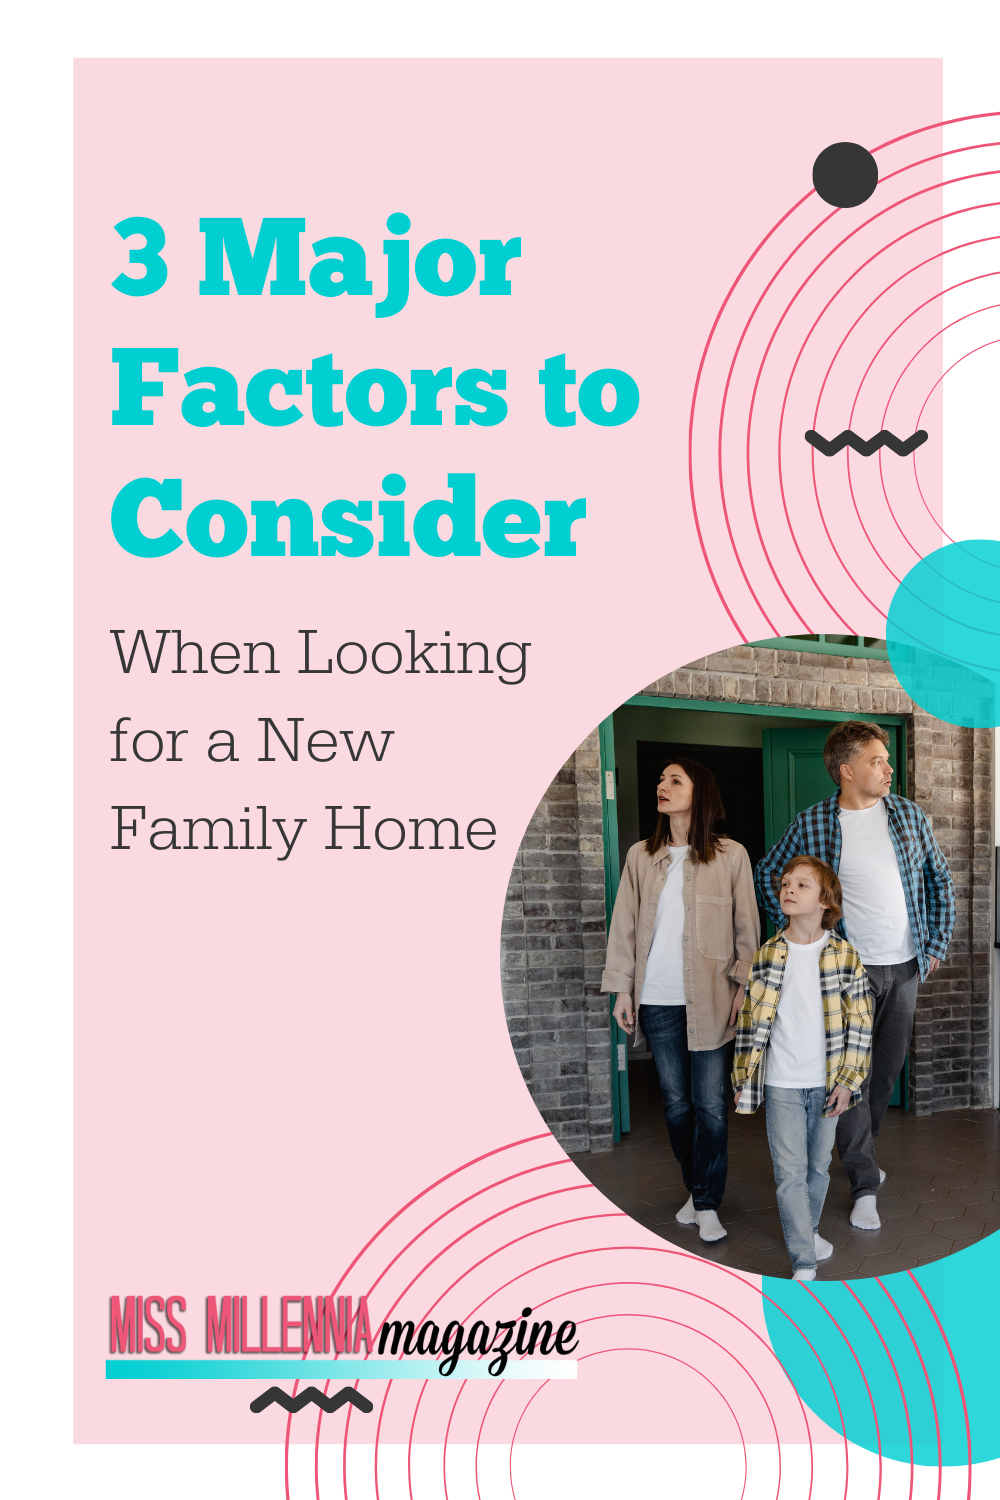 3 Major Factors to Consider When Looking for a New Family Home